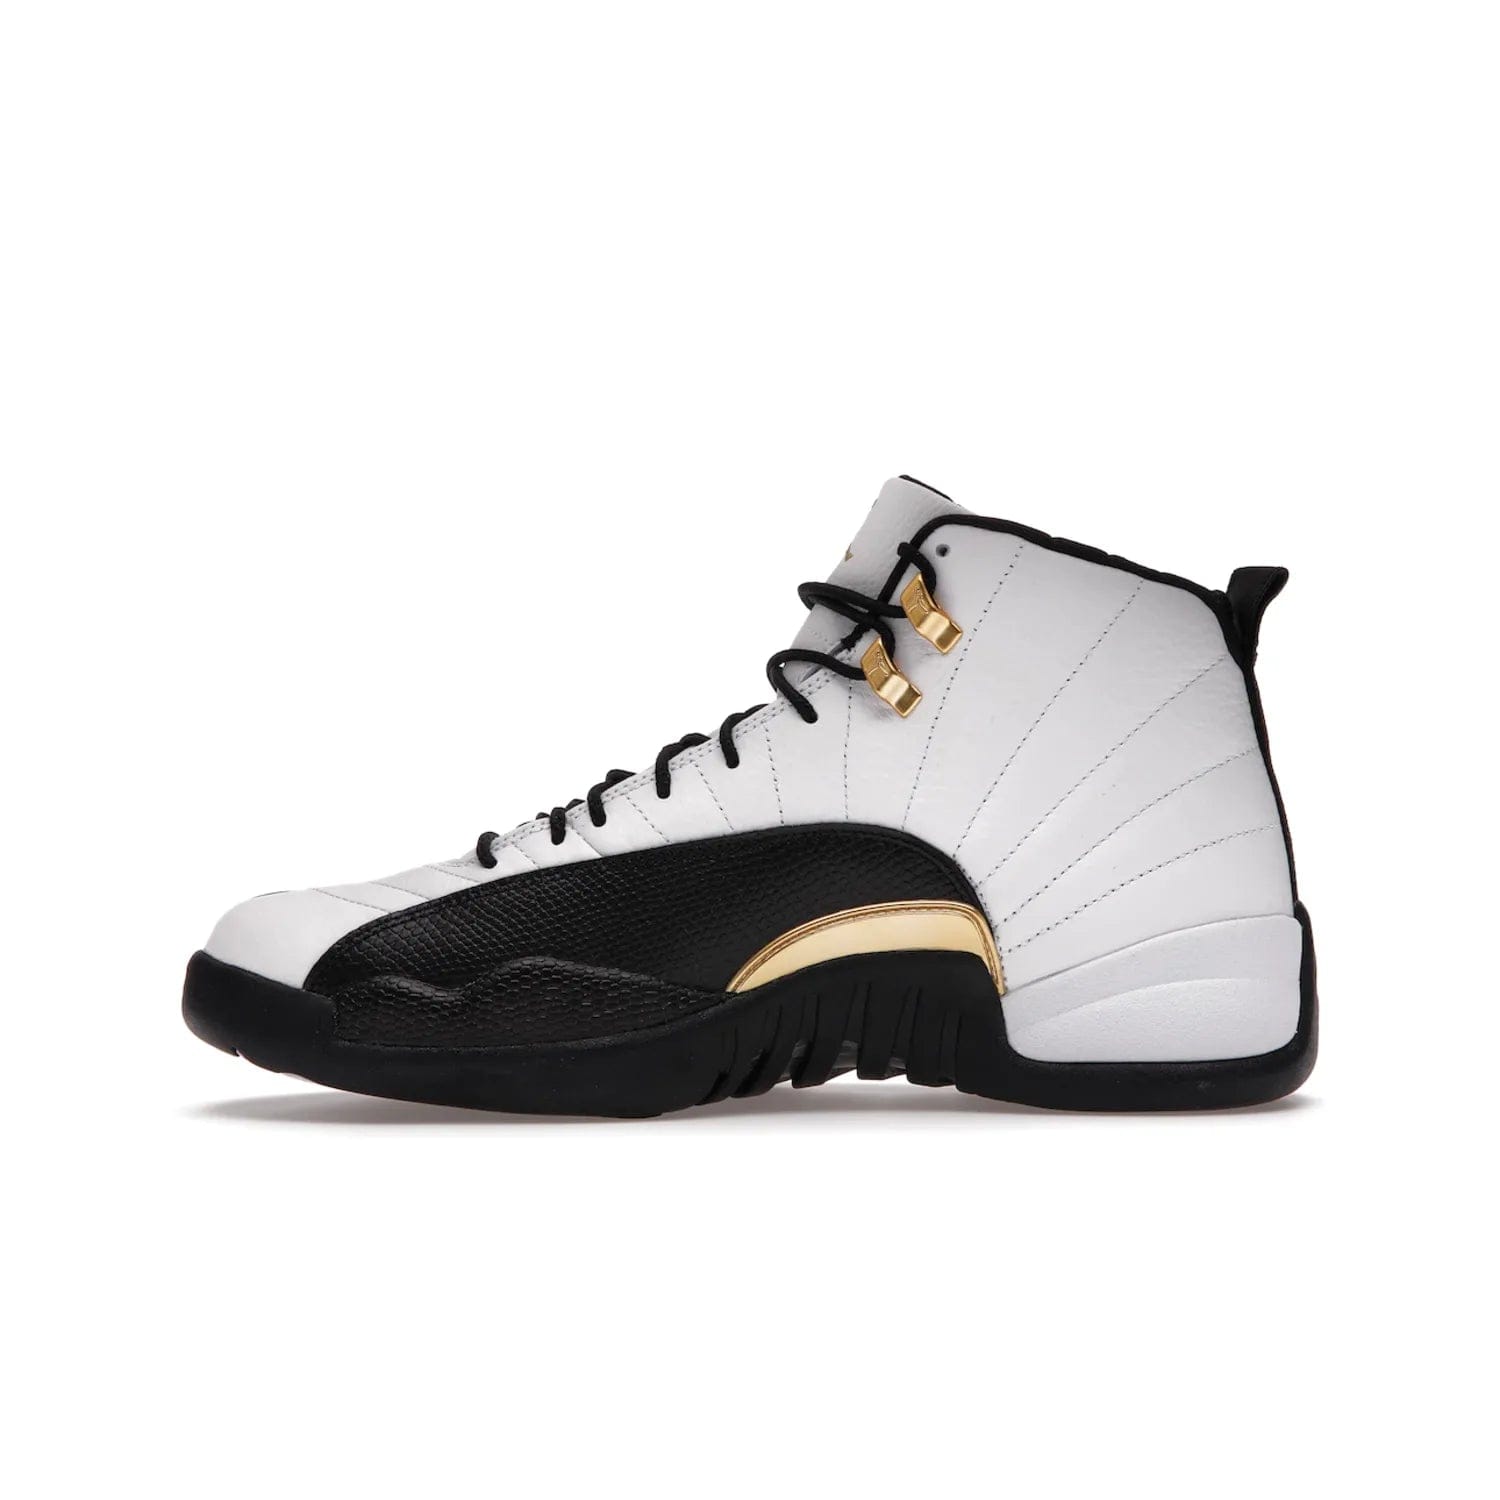 Jordan 12 Retro Royalty Taxi - Image 19 - Only at www.BallersClubKickz.com - Make a statement with the Air Jordan 12 Retro Royalty Taxi. Woven heel tag, gold plaquet, white tumbled leather upper plus a black toe wrap, make this modern take on the classic a must-have. Available in November 2021.